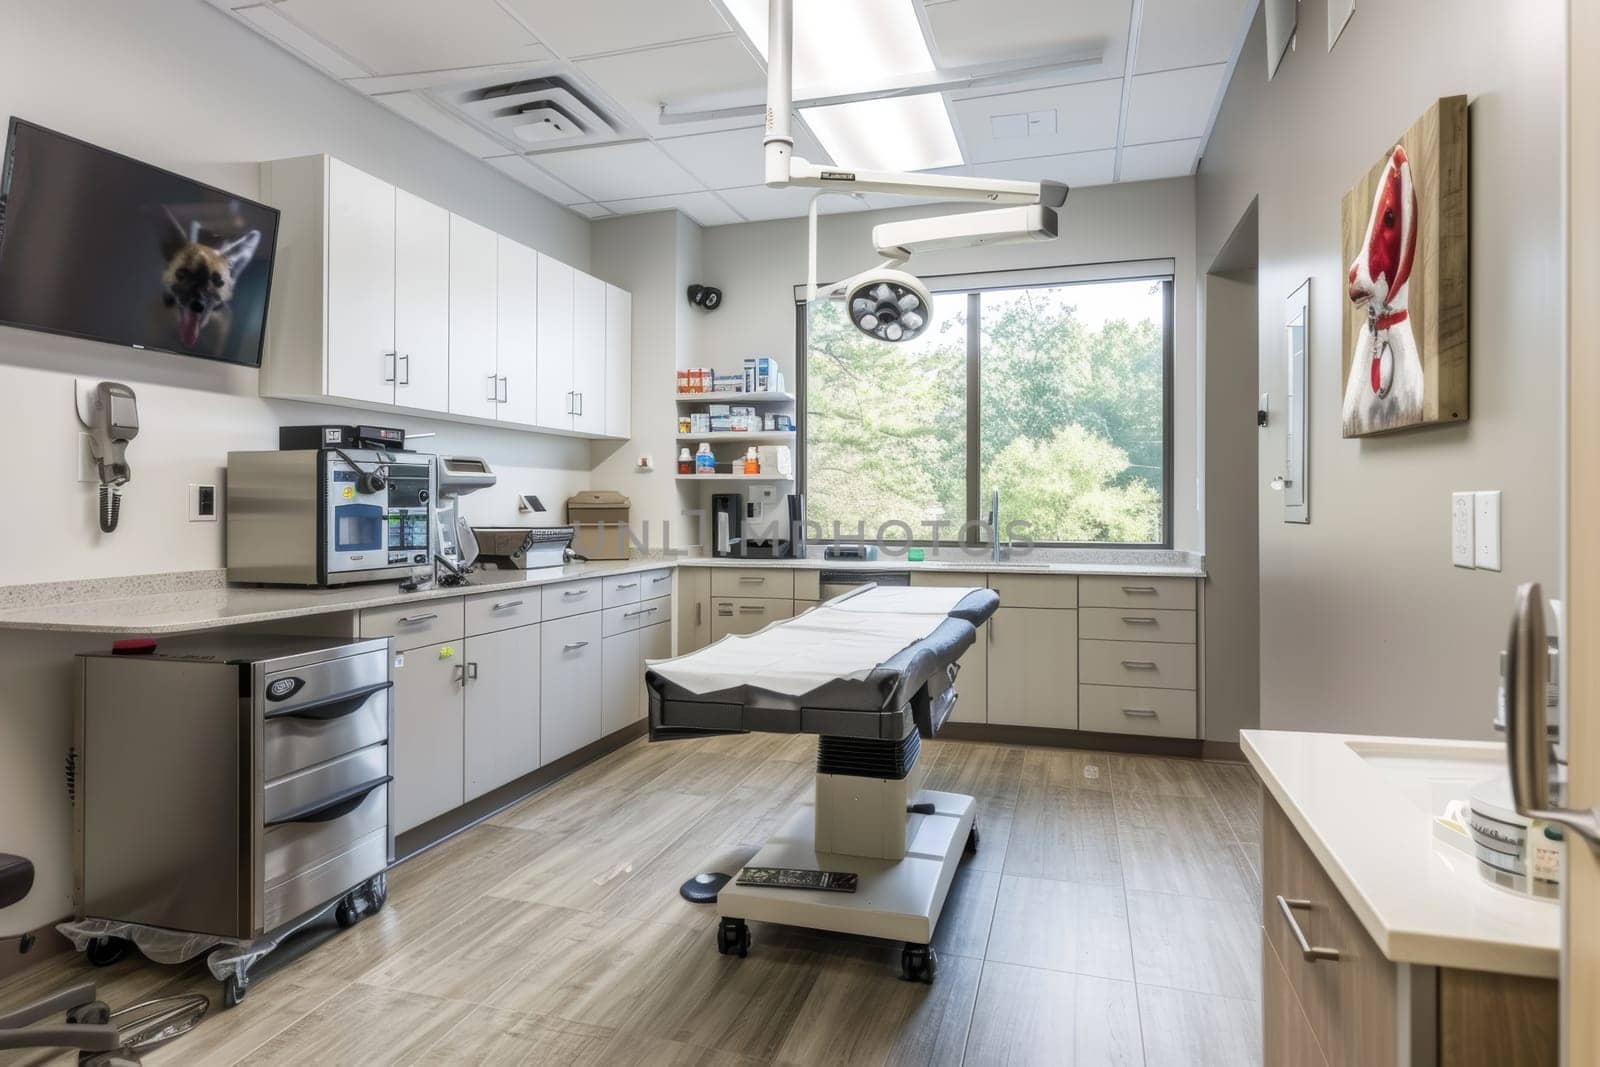 This image showcases a well-equipped veterinary clinic with a patient table, cabinetry, and medical equipment, ready for animal care